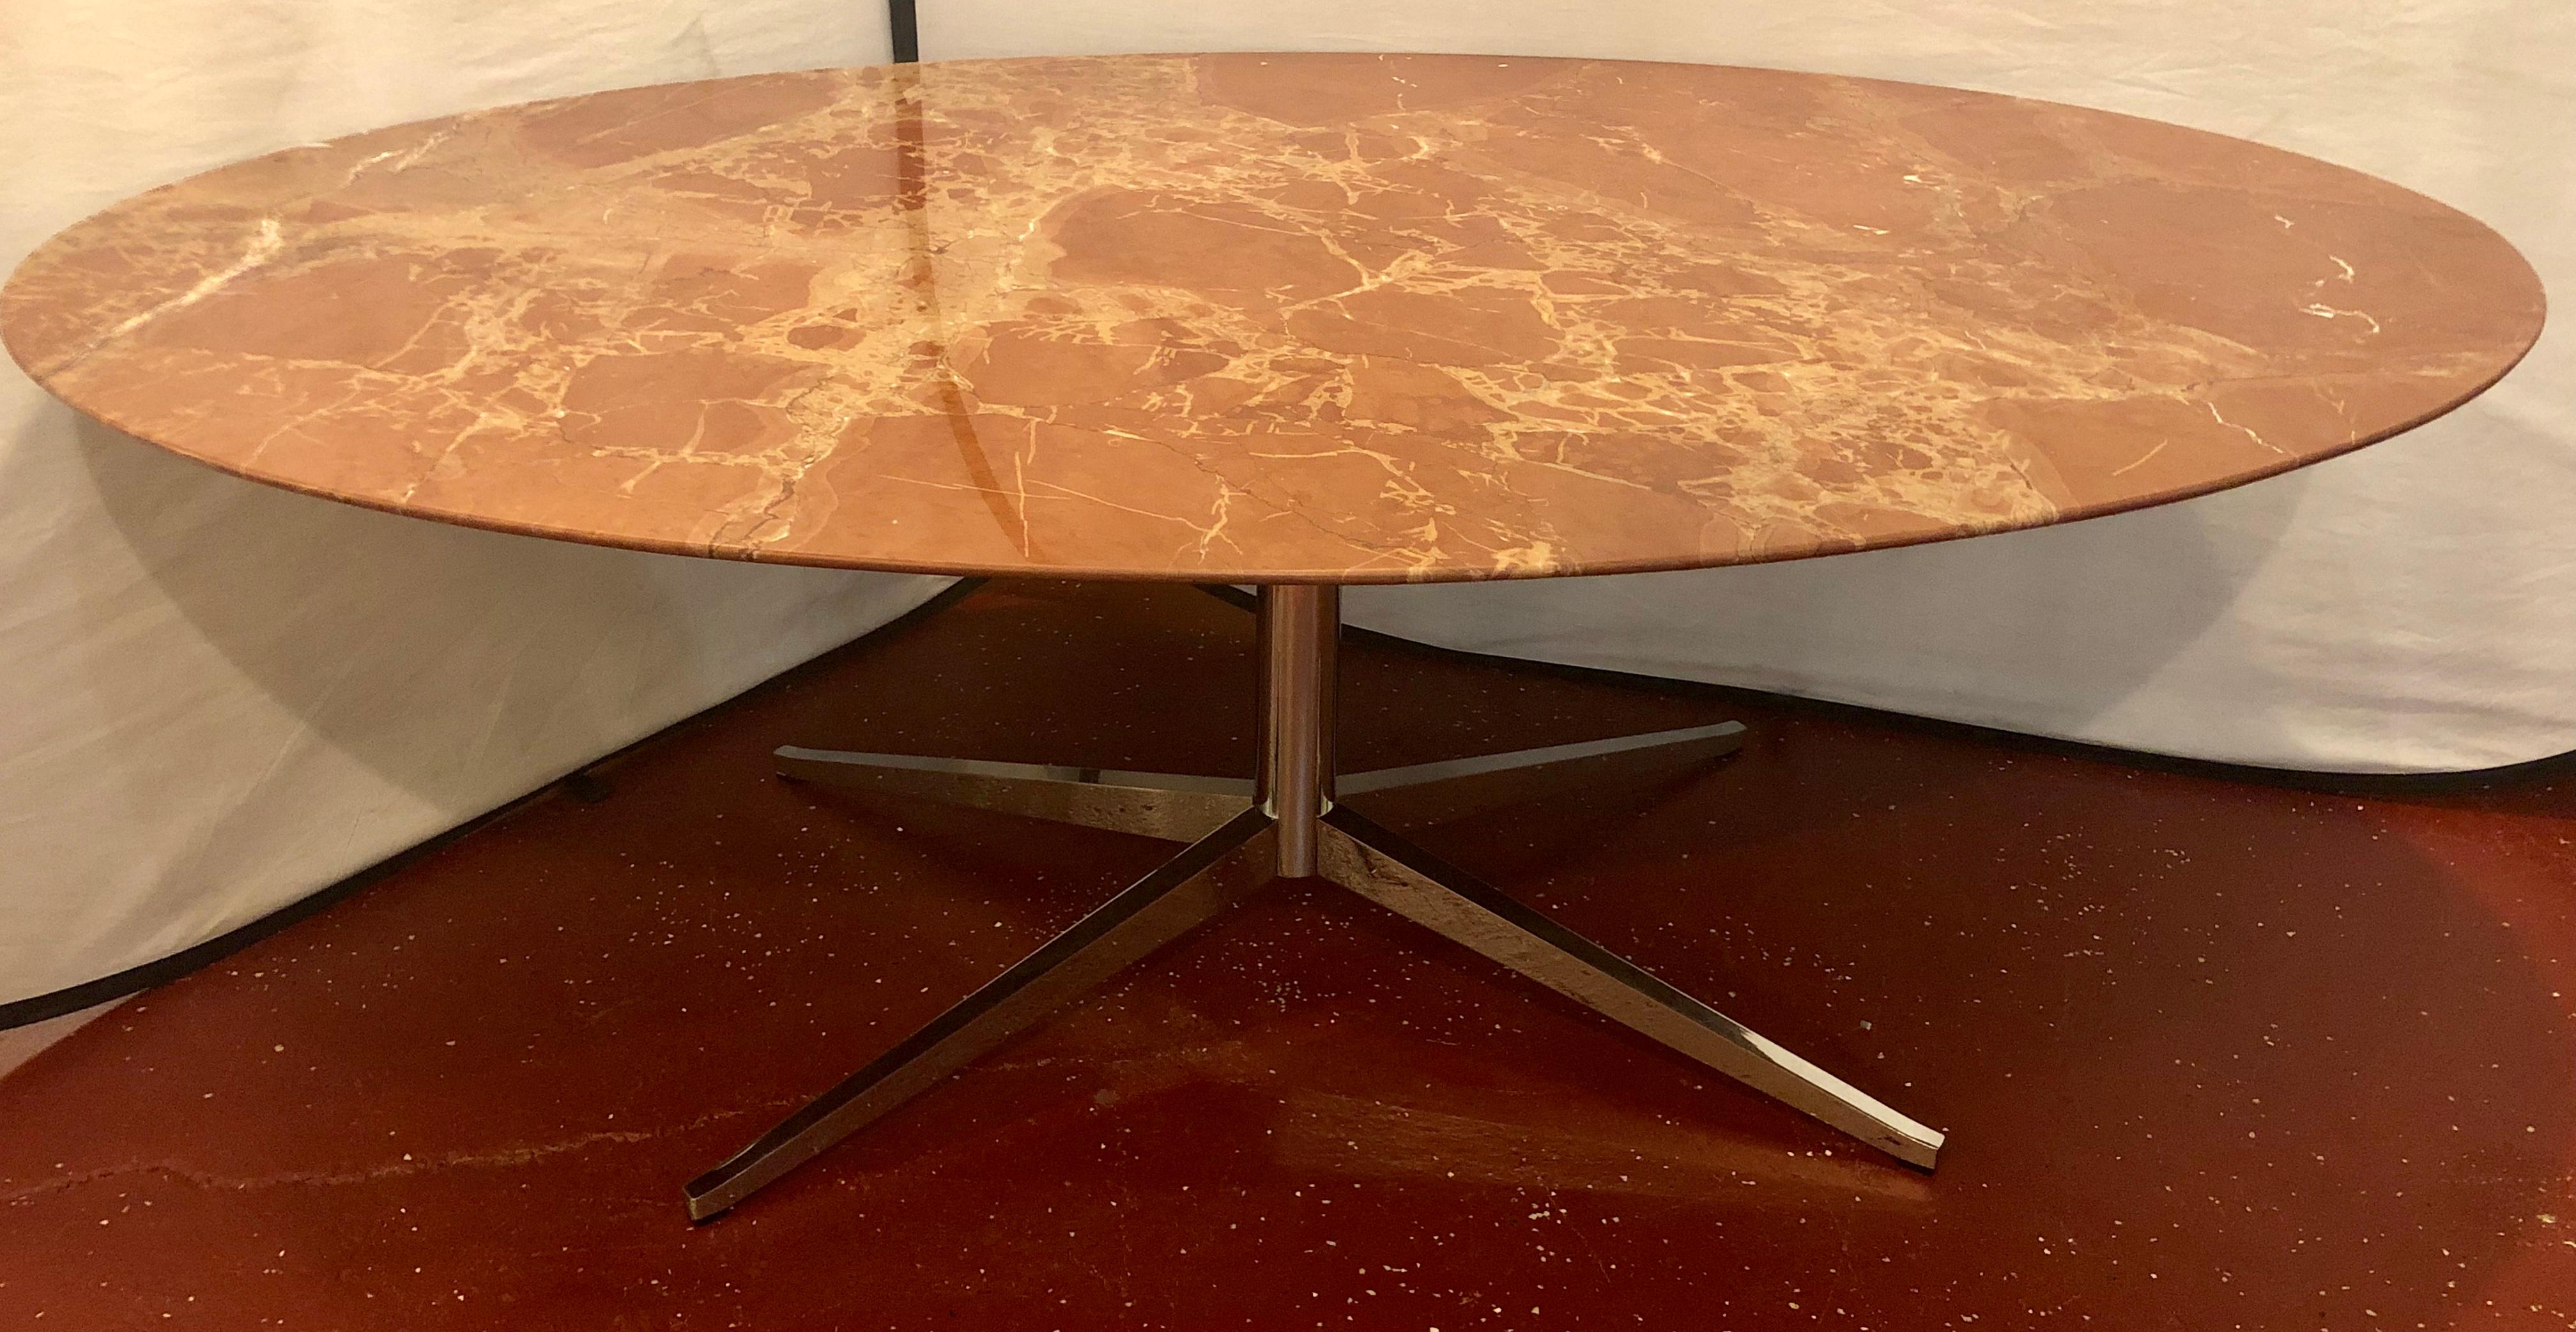 Florence Knoll Dining Table / Conference Table Chrome Quad Based Marble Top. A Florence Knoll Studio chrome quad based marble top dining, center or conference table having a lovey rouge marble top. Bearing a bank of the southwest national